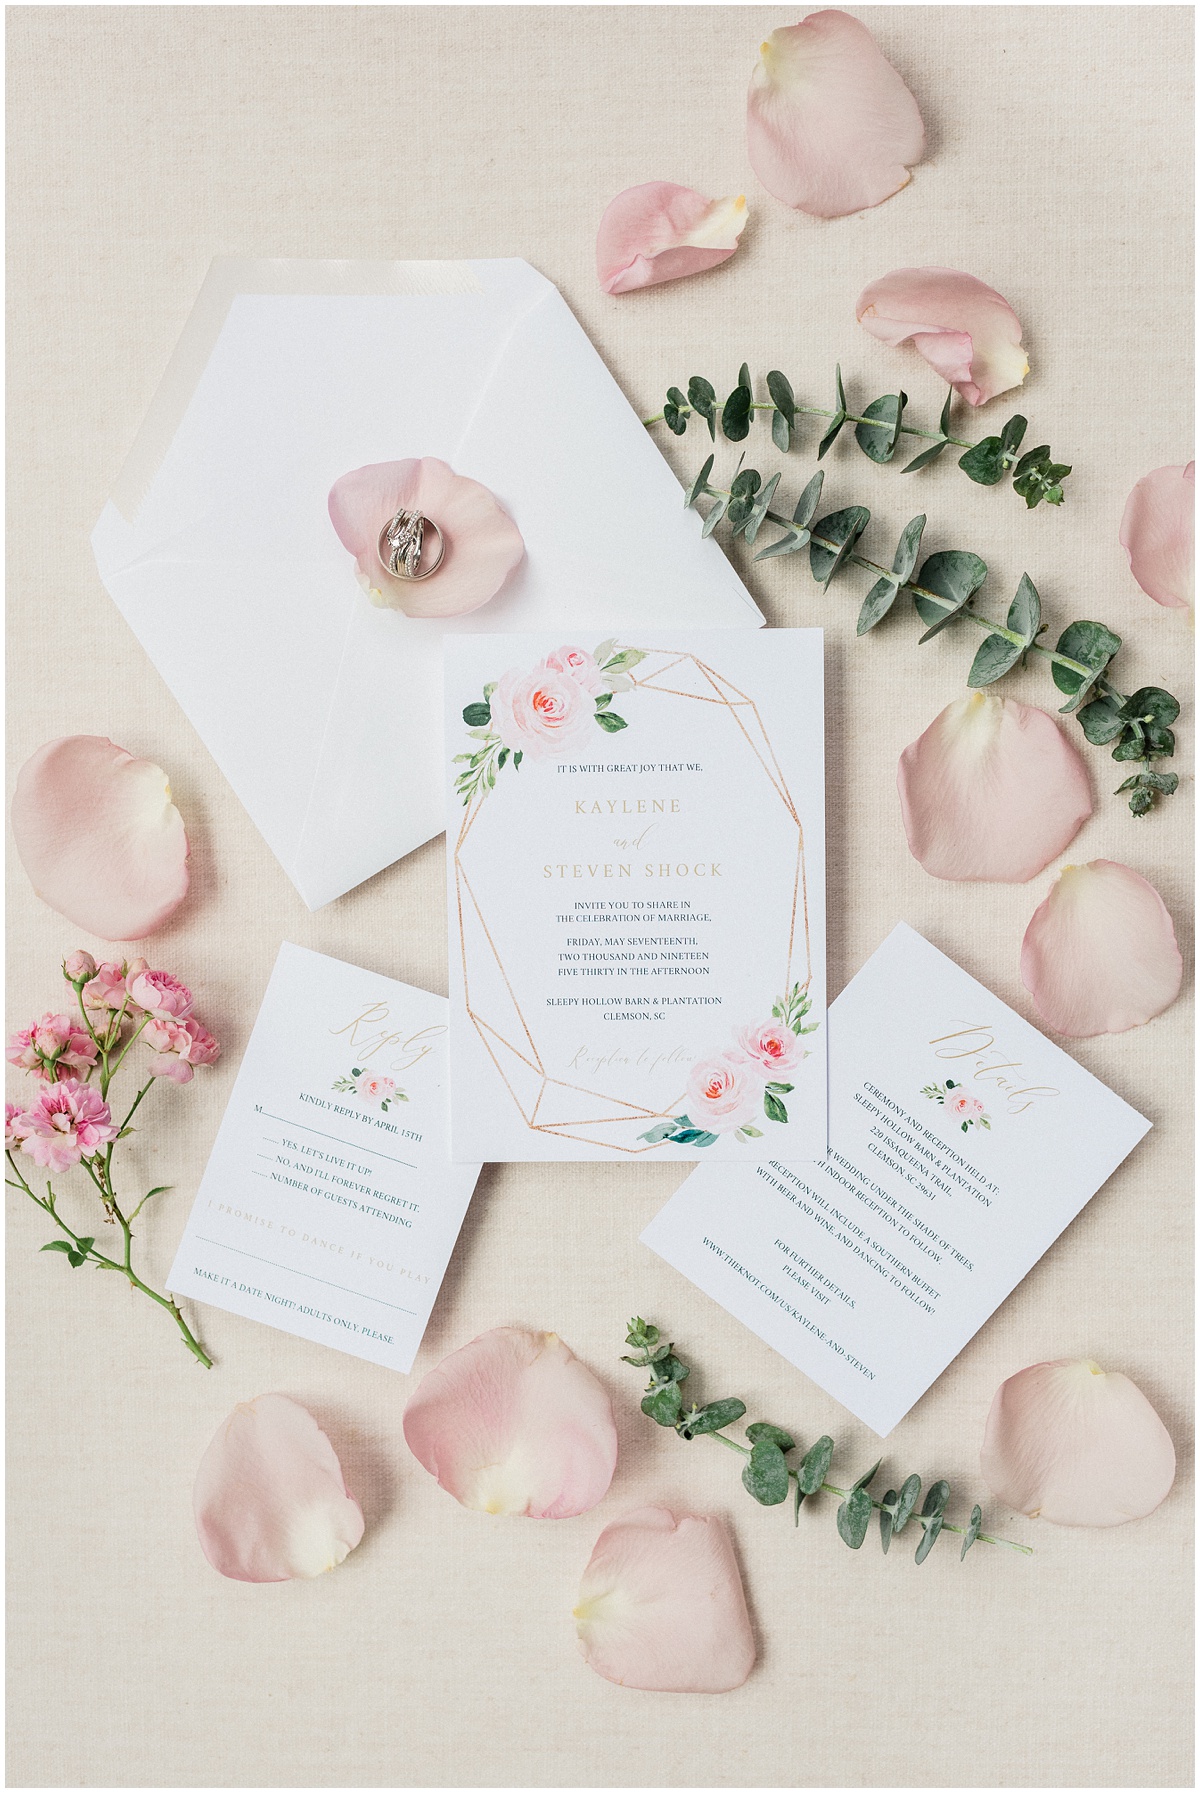 Blush inspired wedding invitation suite with greenery